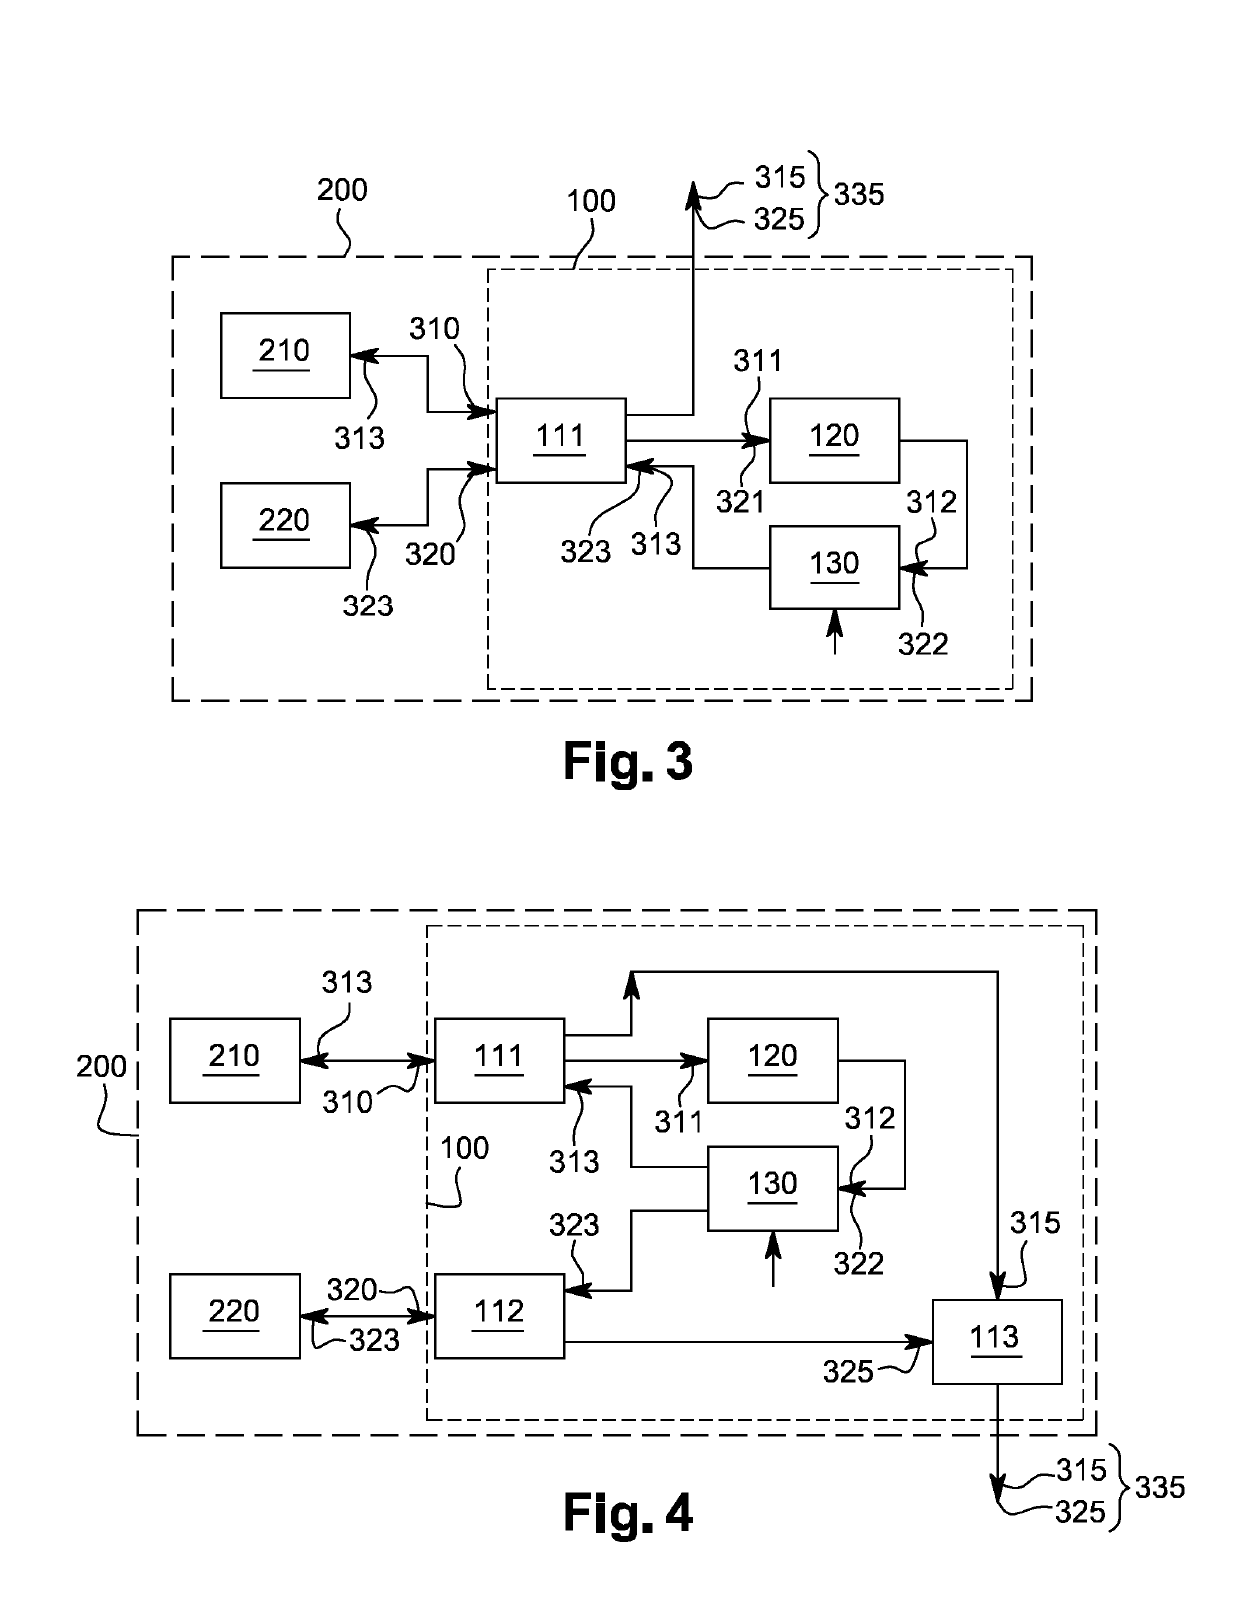 Spectral narrowing module, refined spectral line device and method therefor